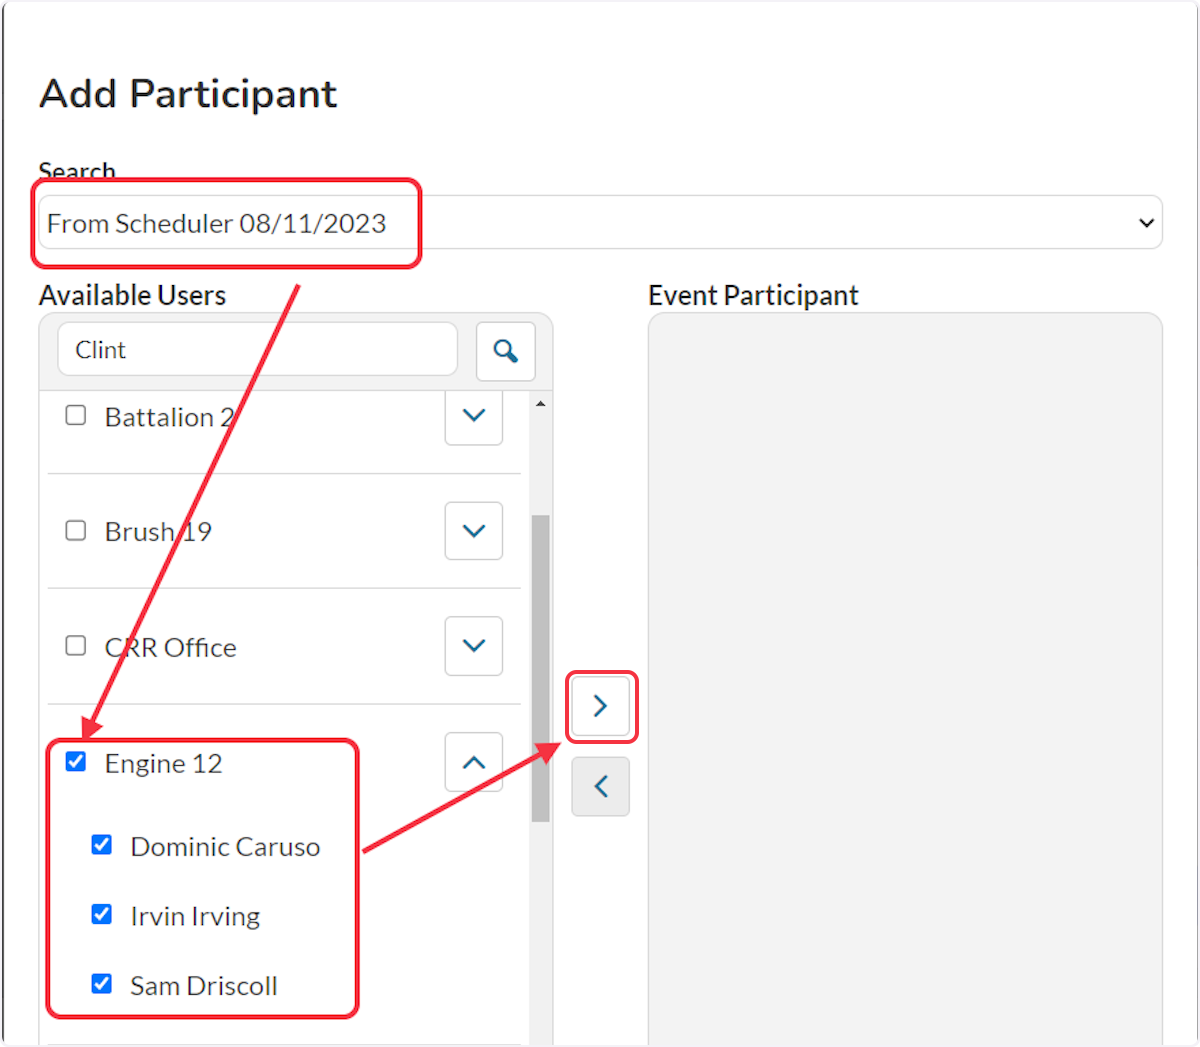 The ability to bulk add participants can be done by using the search bar to locate where participants will be pulled from.